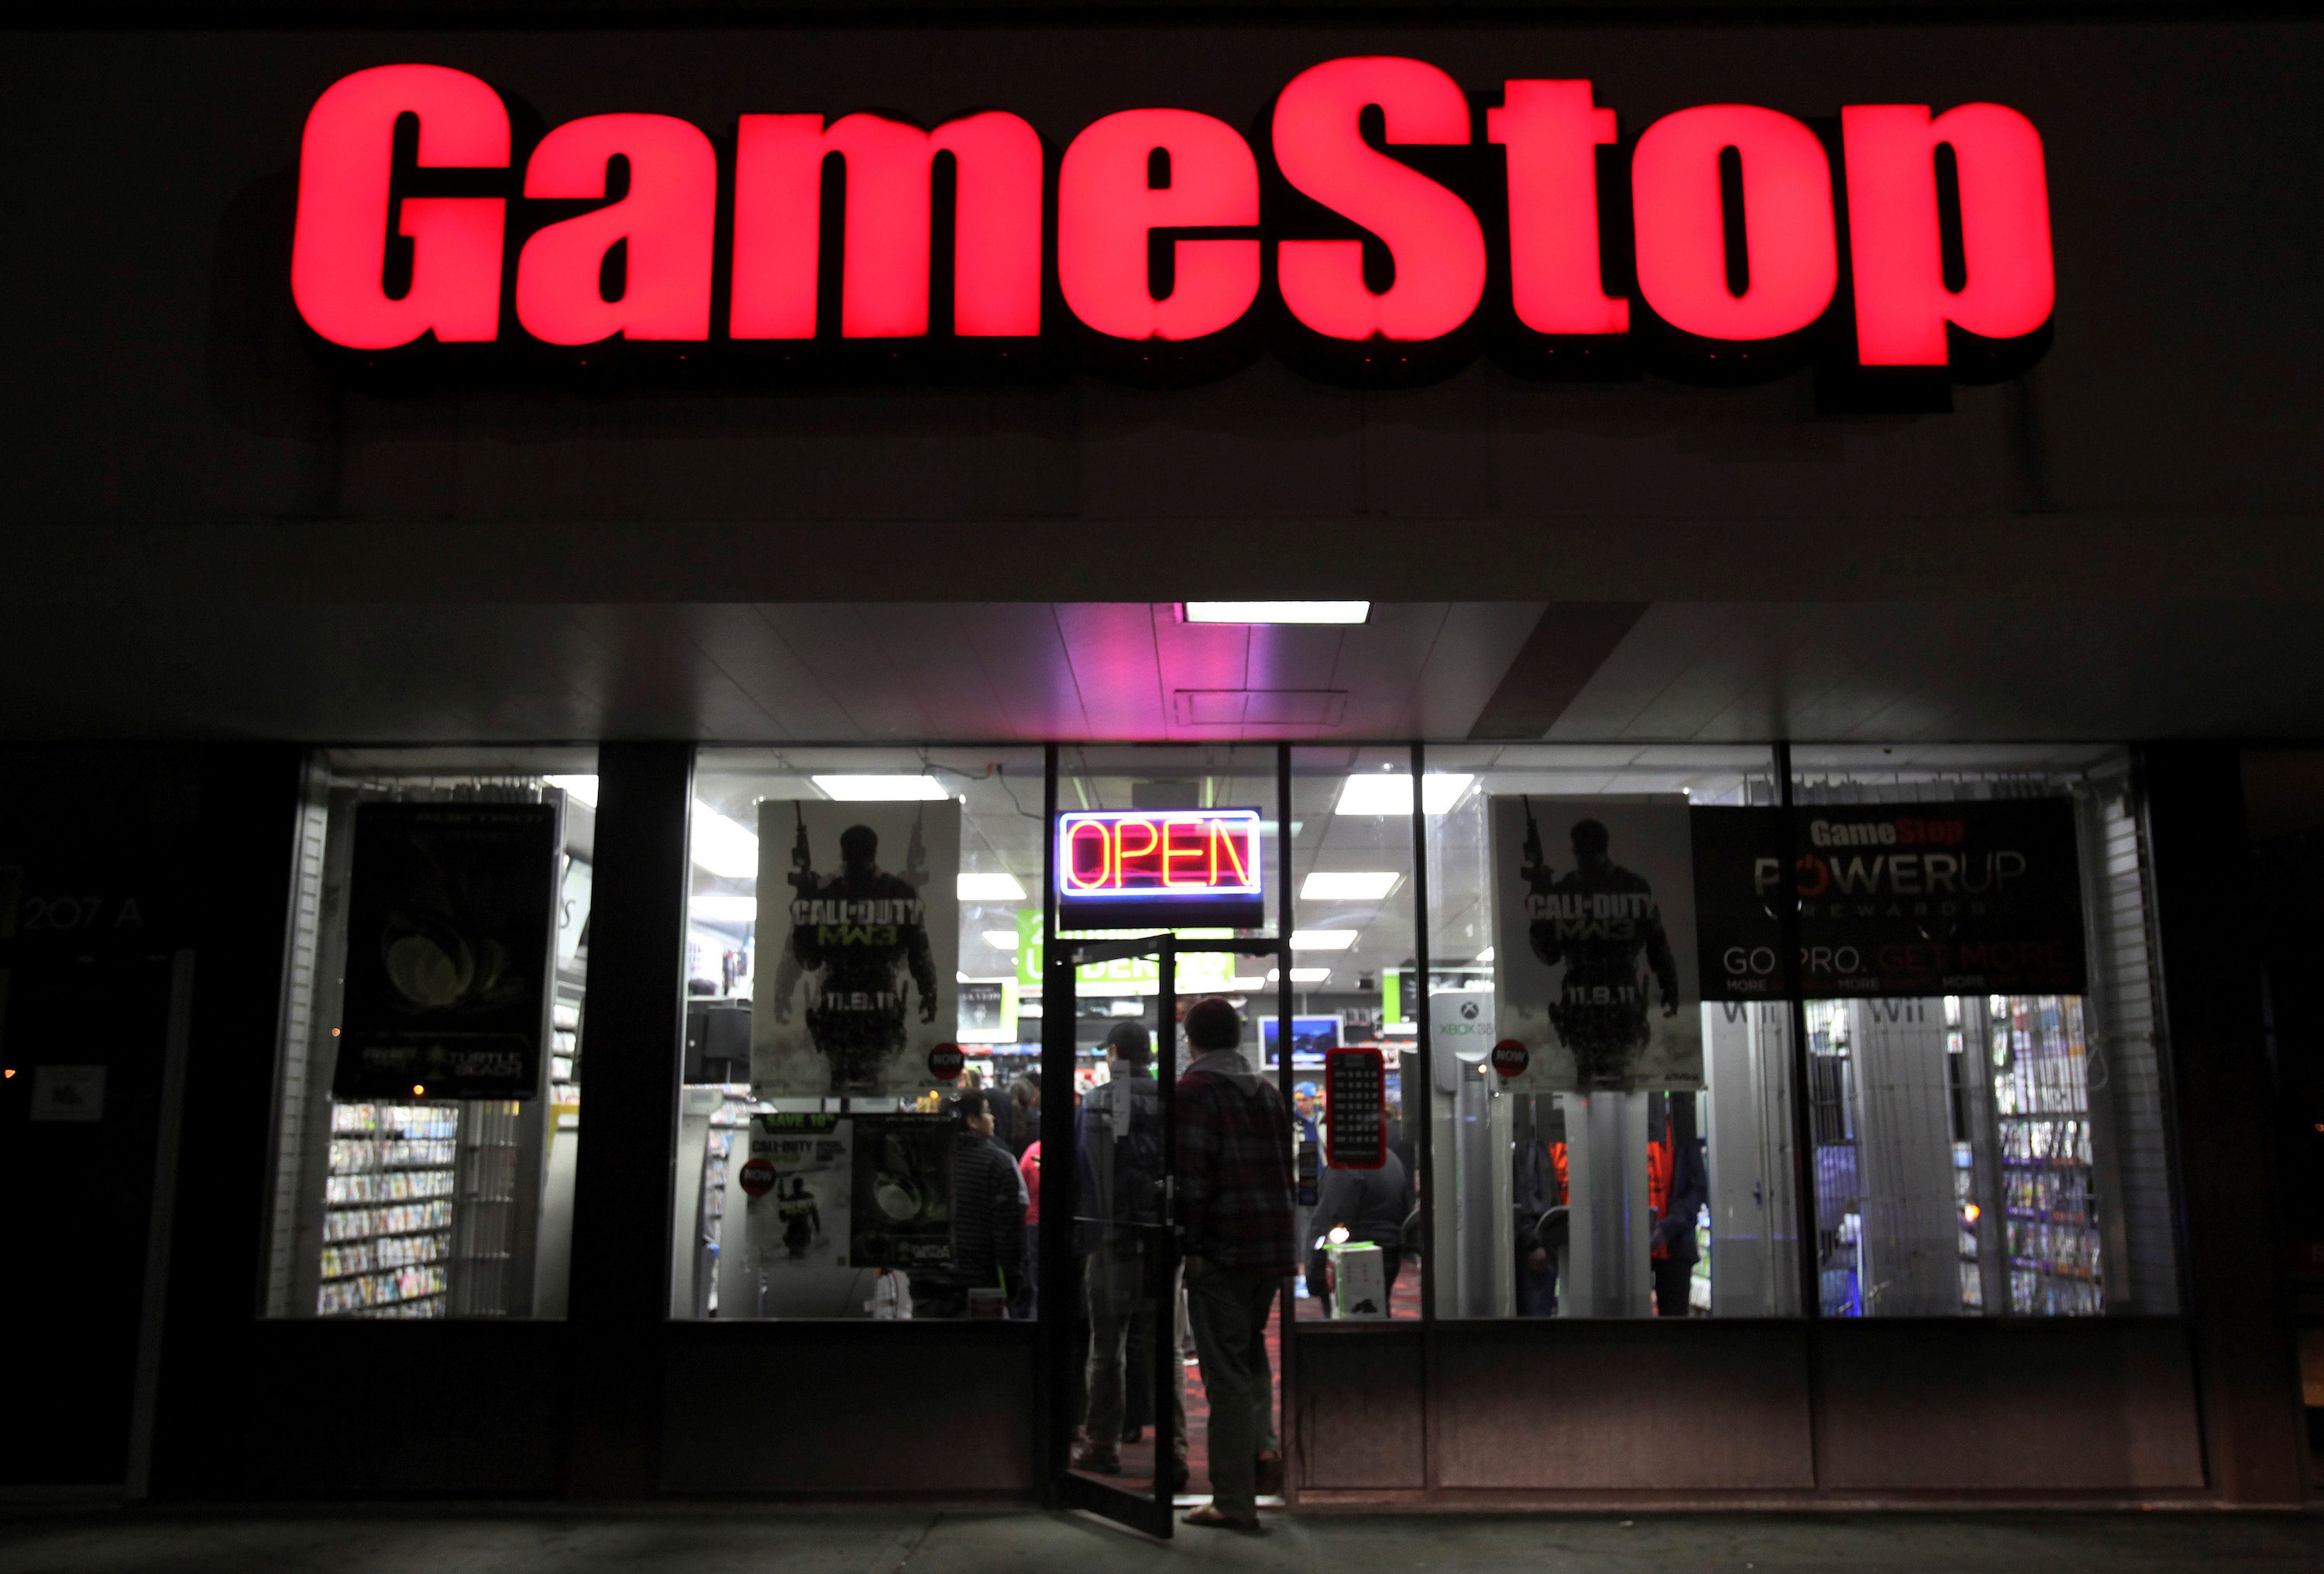 Sideshow or main event? GameStop stock ride weighed as bubble warning